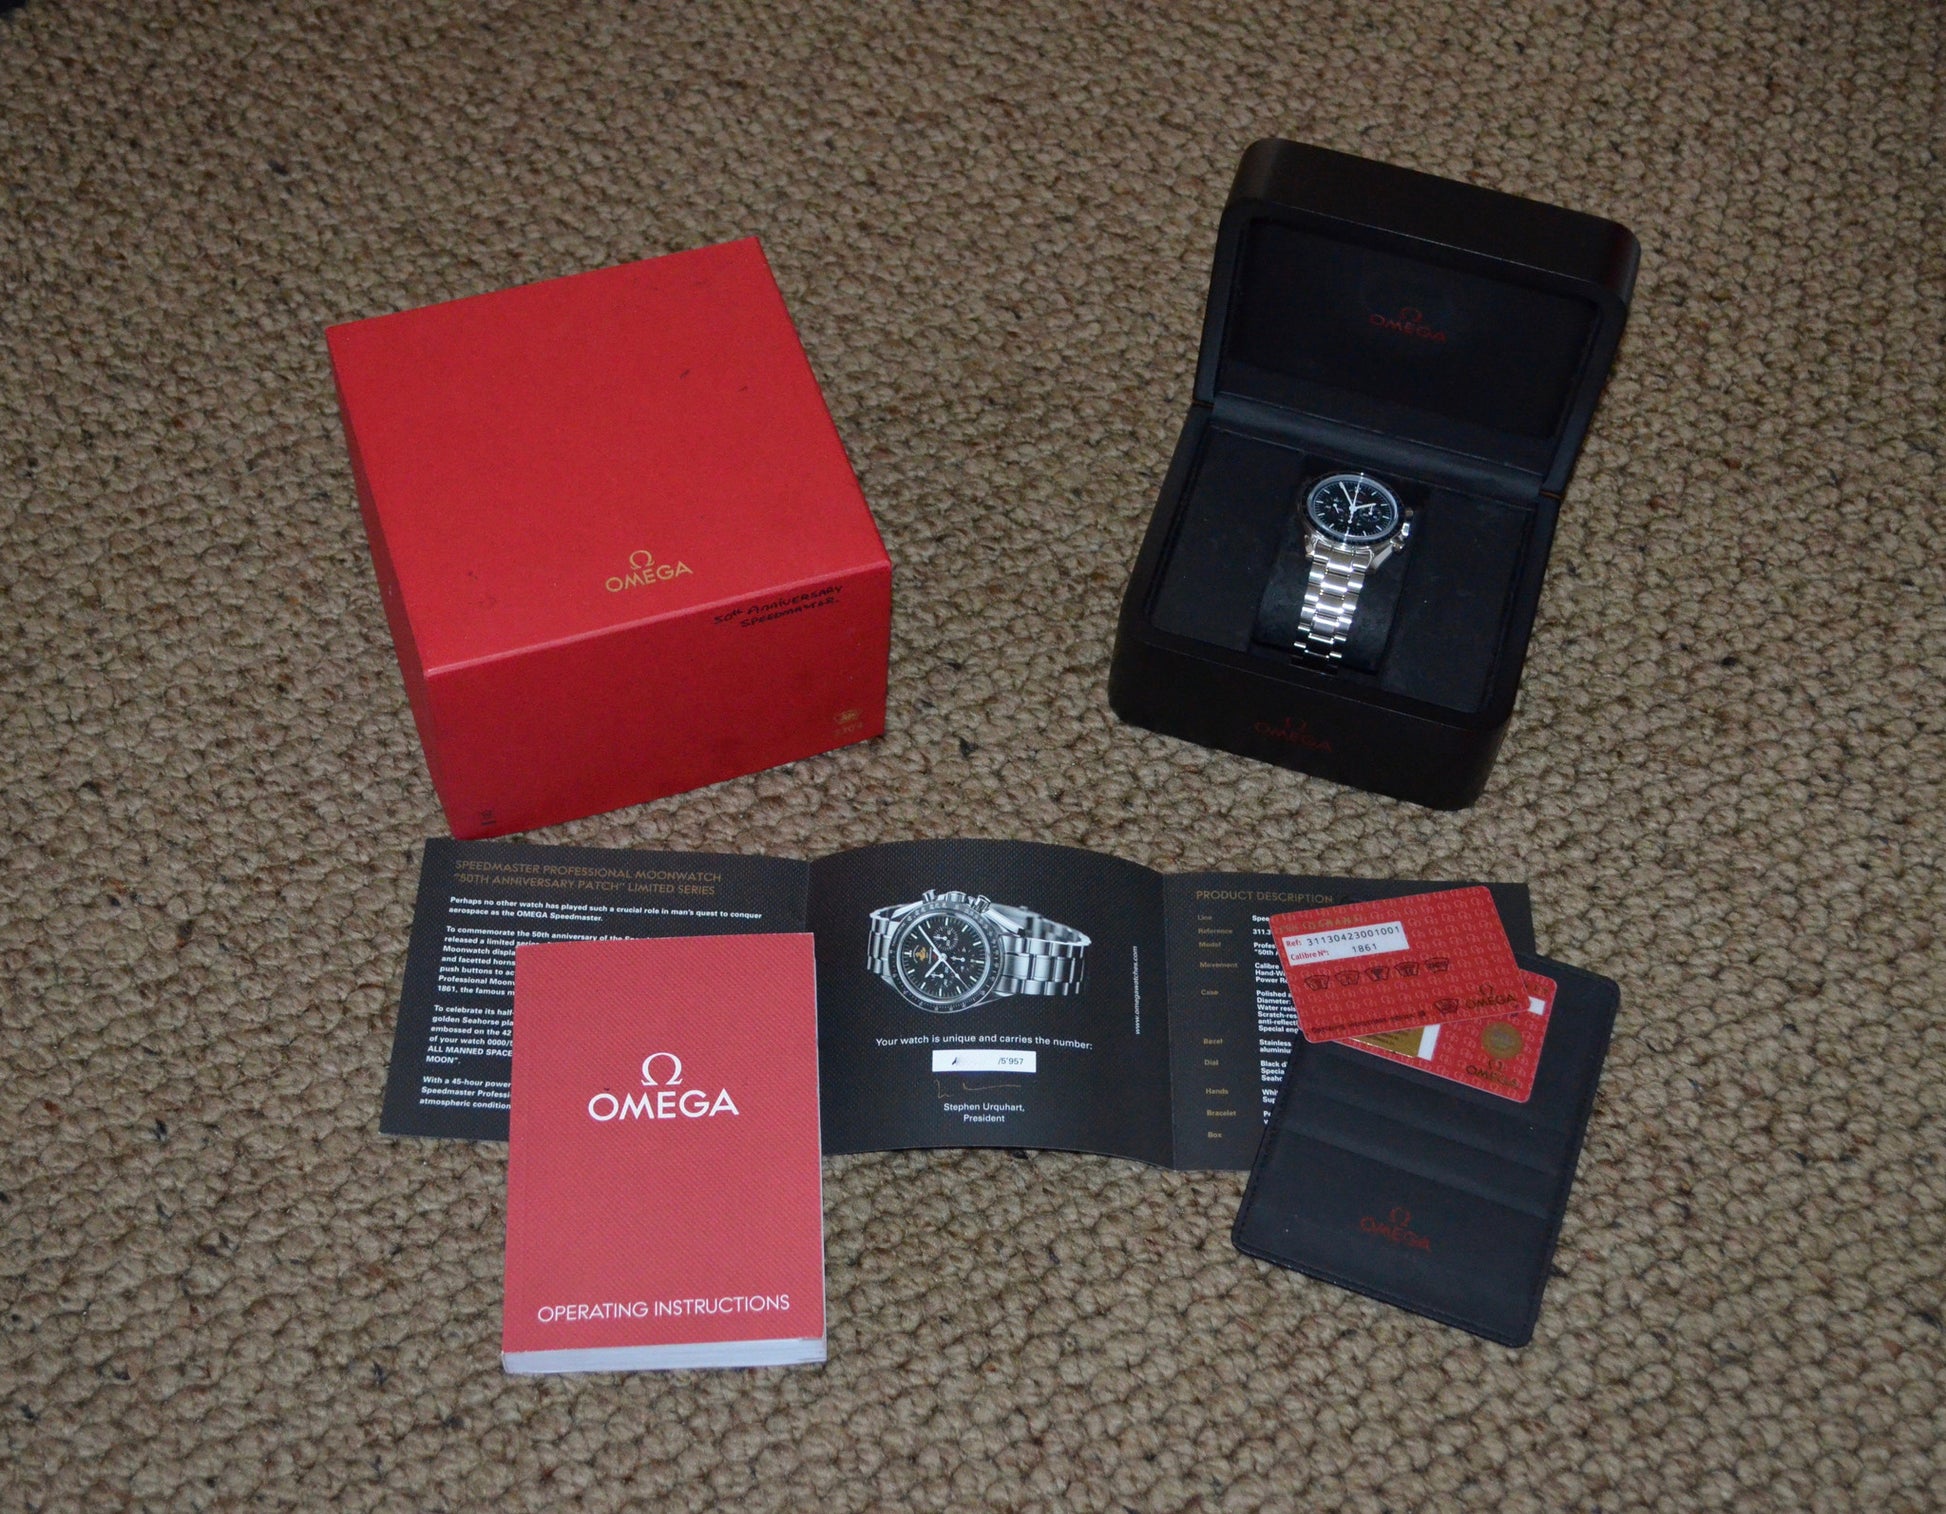 Omega Speedmaster 50th Anniversary 311.30.42.30.01.001 Professional Moon Watch Box Papers - Hashtag Watch Company